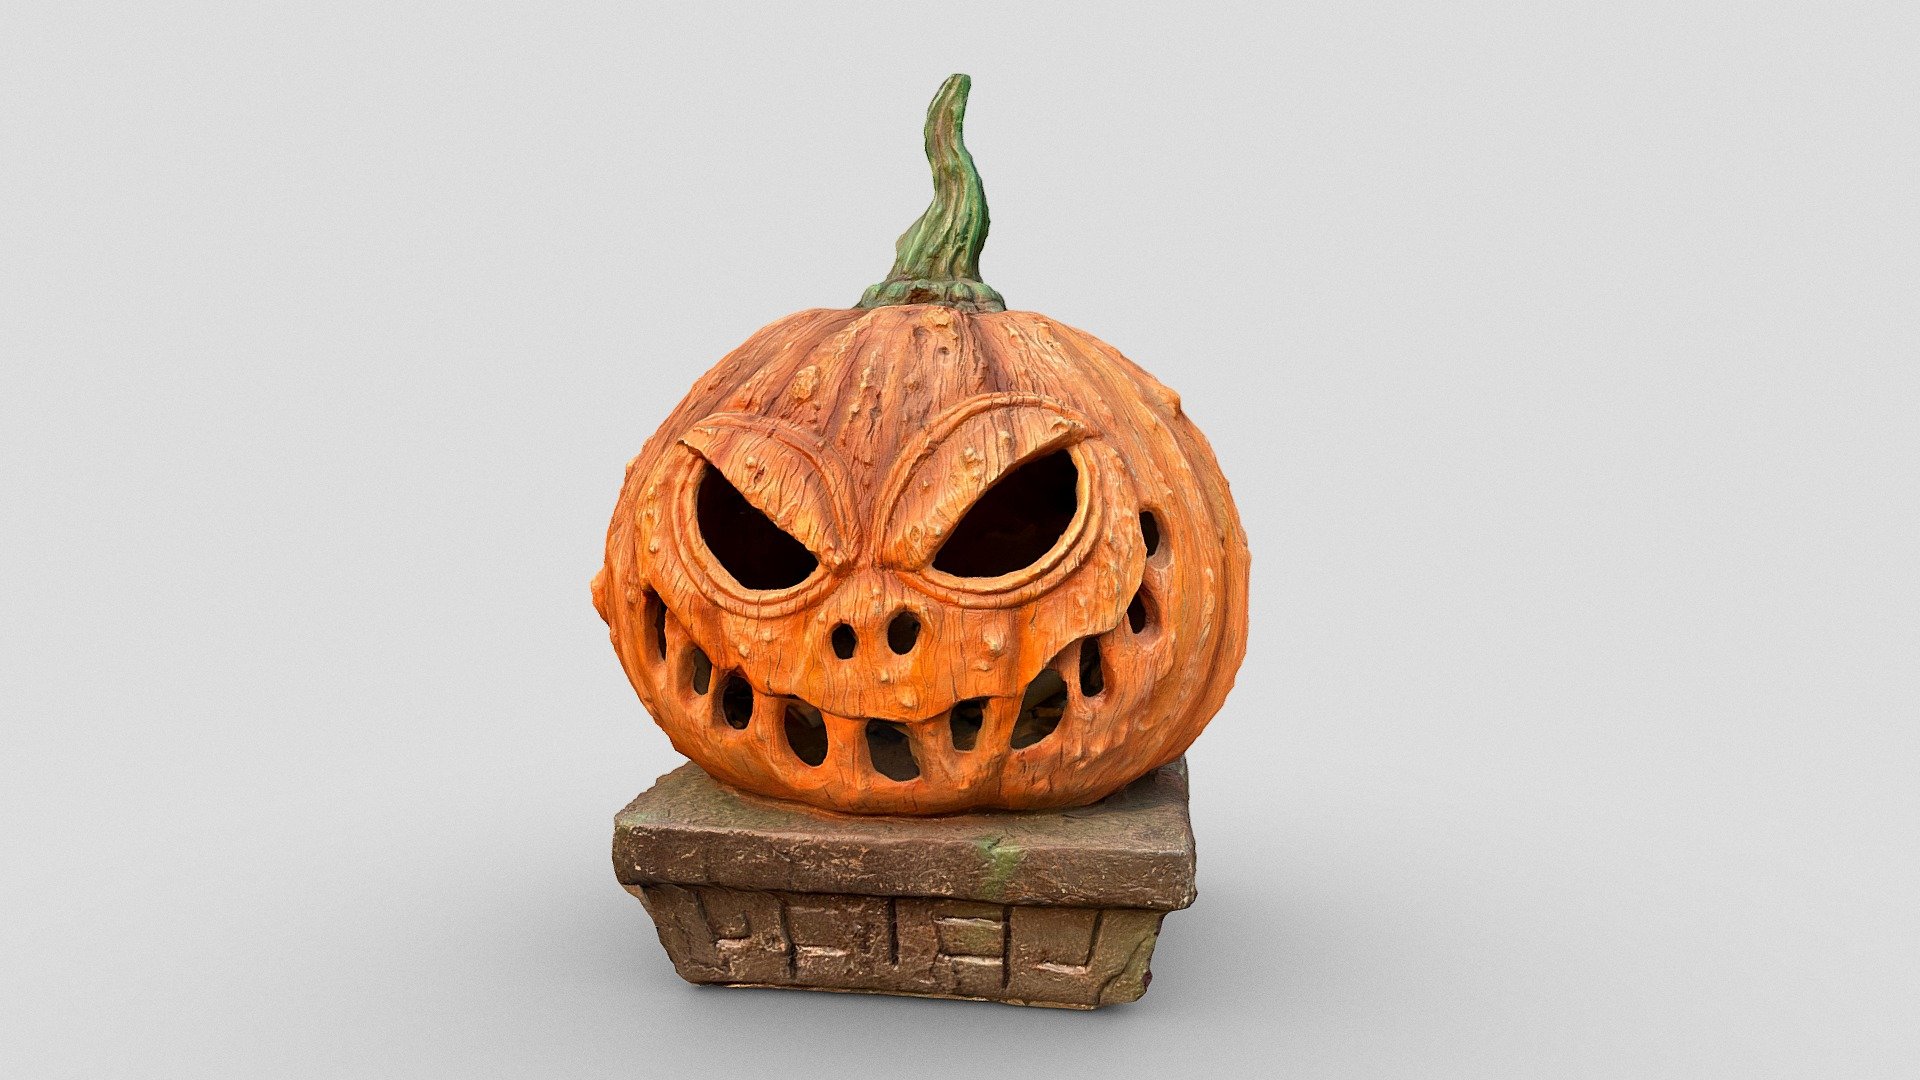 Get ready for some spooky Halloween scans 😂

Scanned with Scenario and the iPhone (https://apps.apple.com/us/app/scenario-play-with-reality/id1590029370) -  Capture 3D models, build 3D scenes and connect with other creators, all from your phone.

Please feel free to follow my collections of daily scans (link) as well as my scans in San Francisco, Paris, or in the catacombs (link). Follow me on Twitter - Day 270: Halloween Pumpkin (iPhone13 scan) - Download Free 3D model by Emm (@edemaistre) 3d model